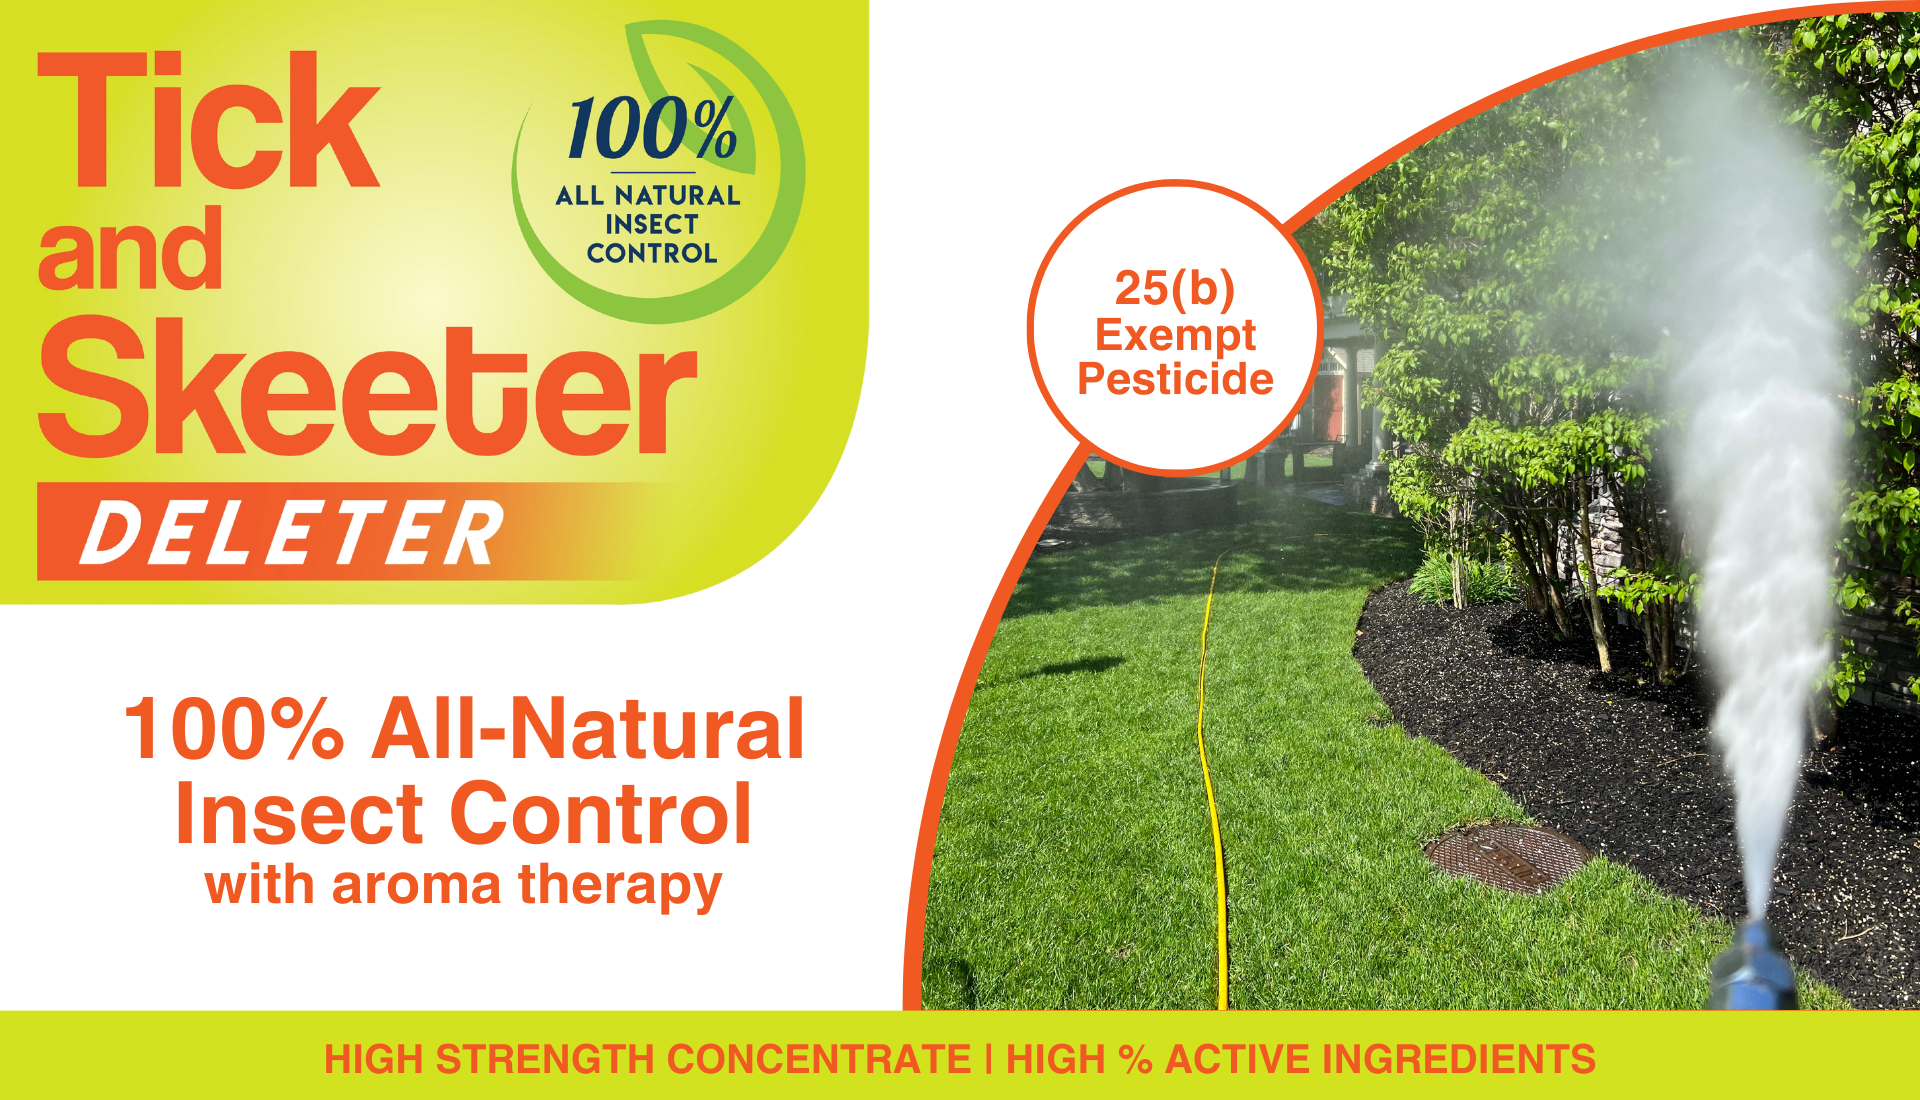 Do it yourself pest control? That's us! Tick and Skeeter Deleter is a 100% all-natural insect control with aroma therapy.  Protect your yard and home from ticks, fleas, chinch bugs, spiders, and more!